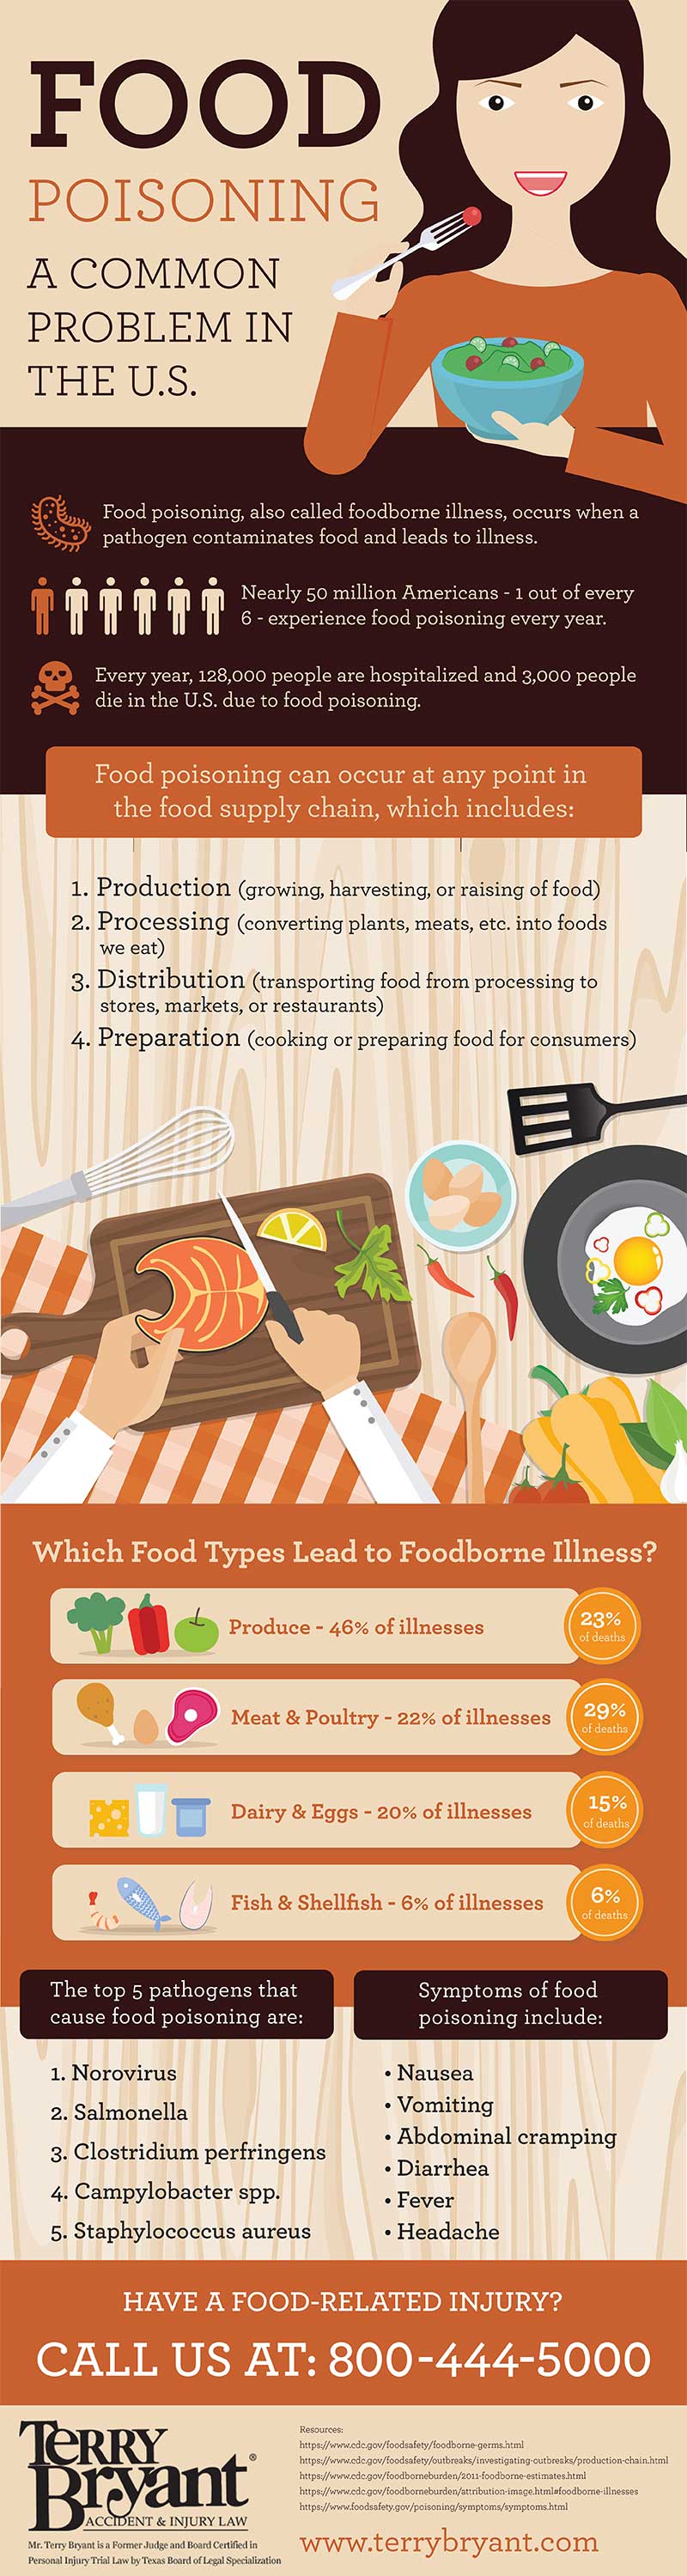 Has Food Poisoning Taken Over America? - Infographic